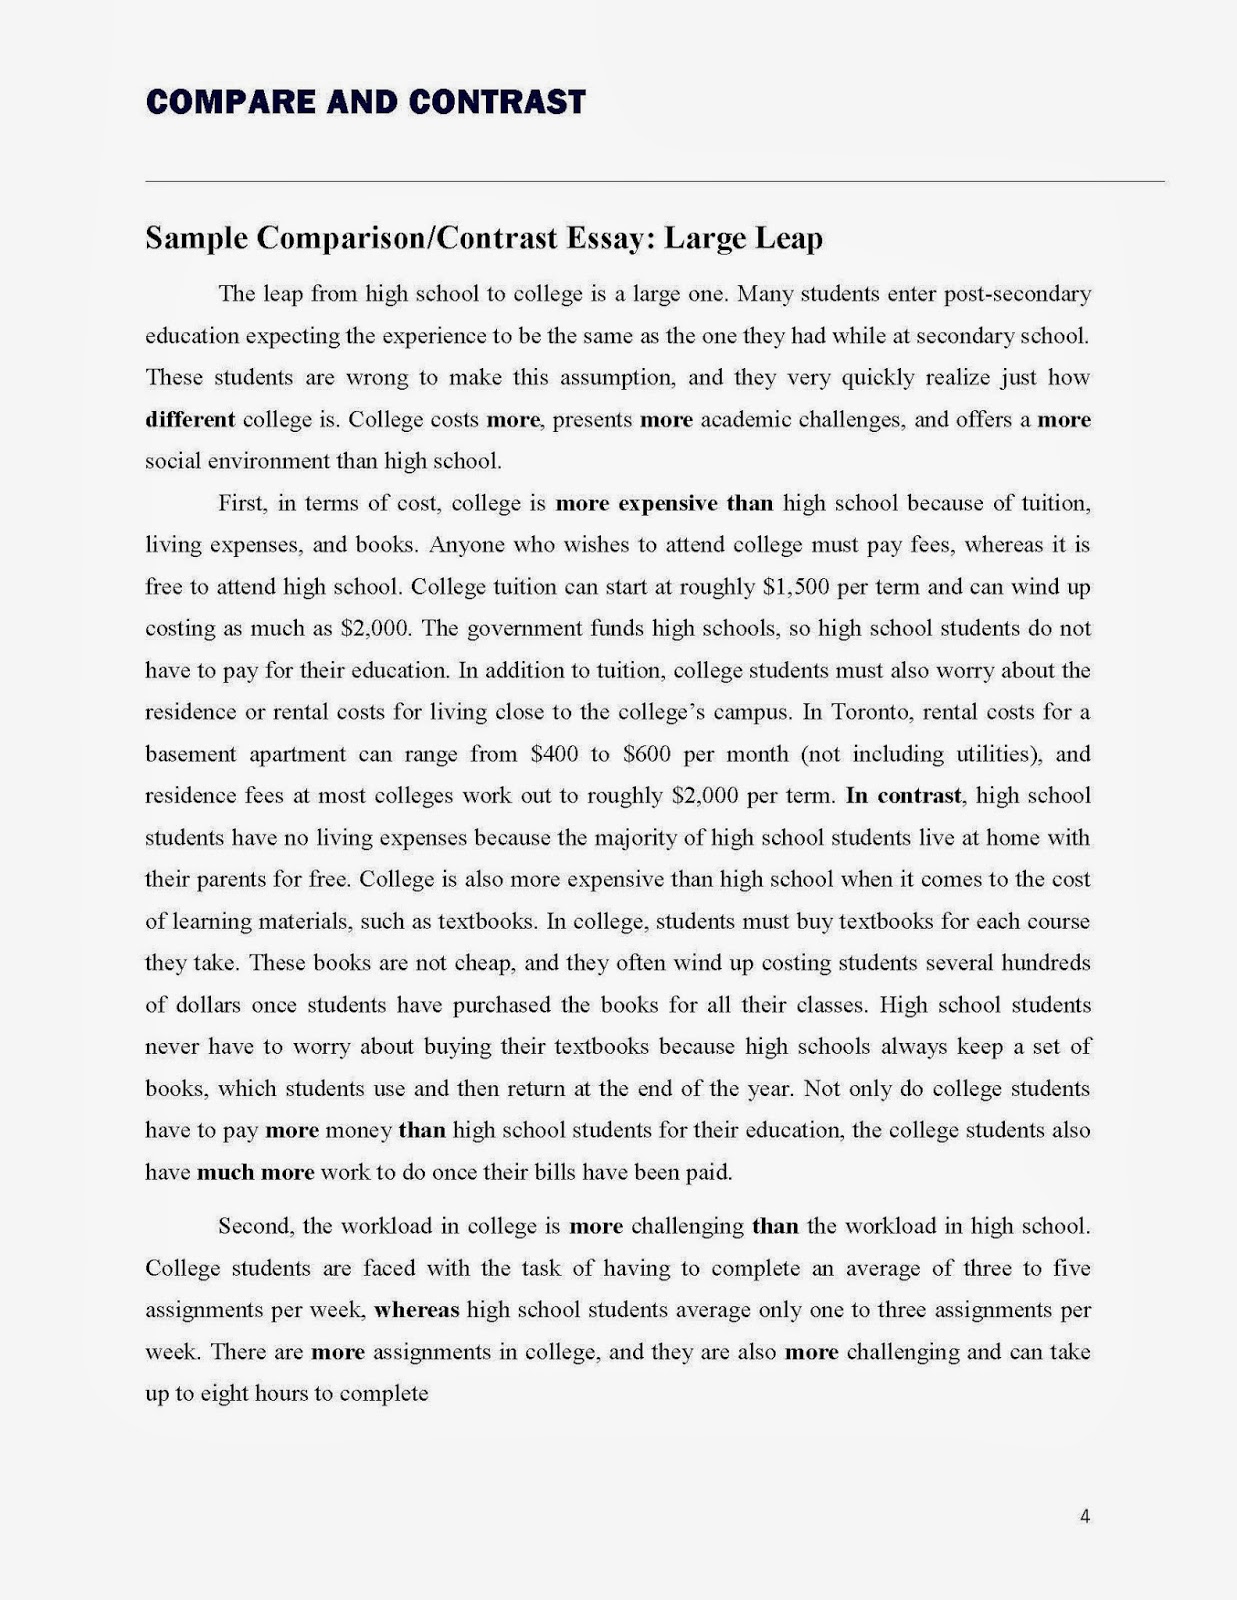 Compare and Contrast Essay Topics for Each Academic Level | EssayPro